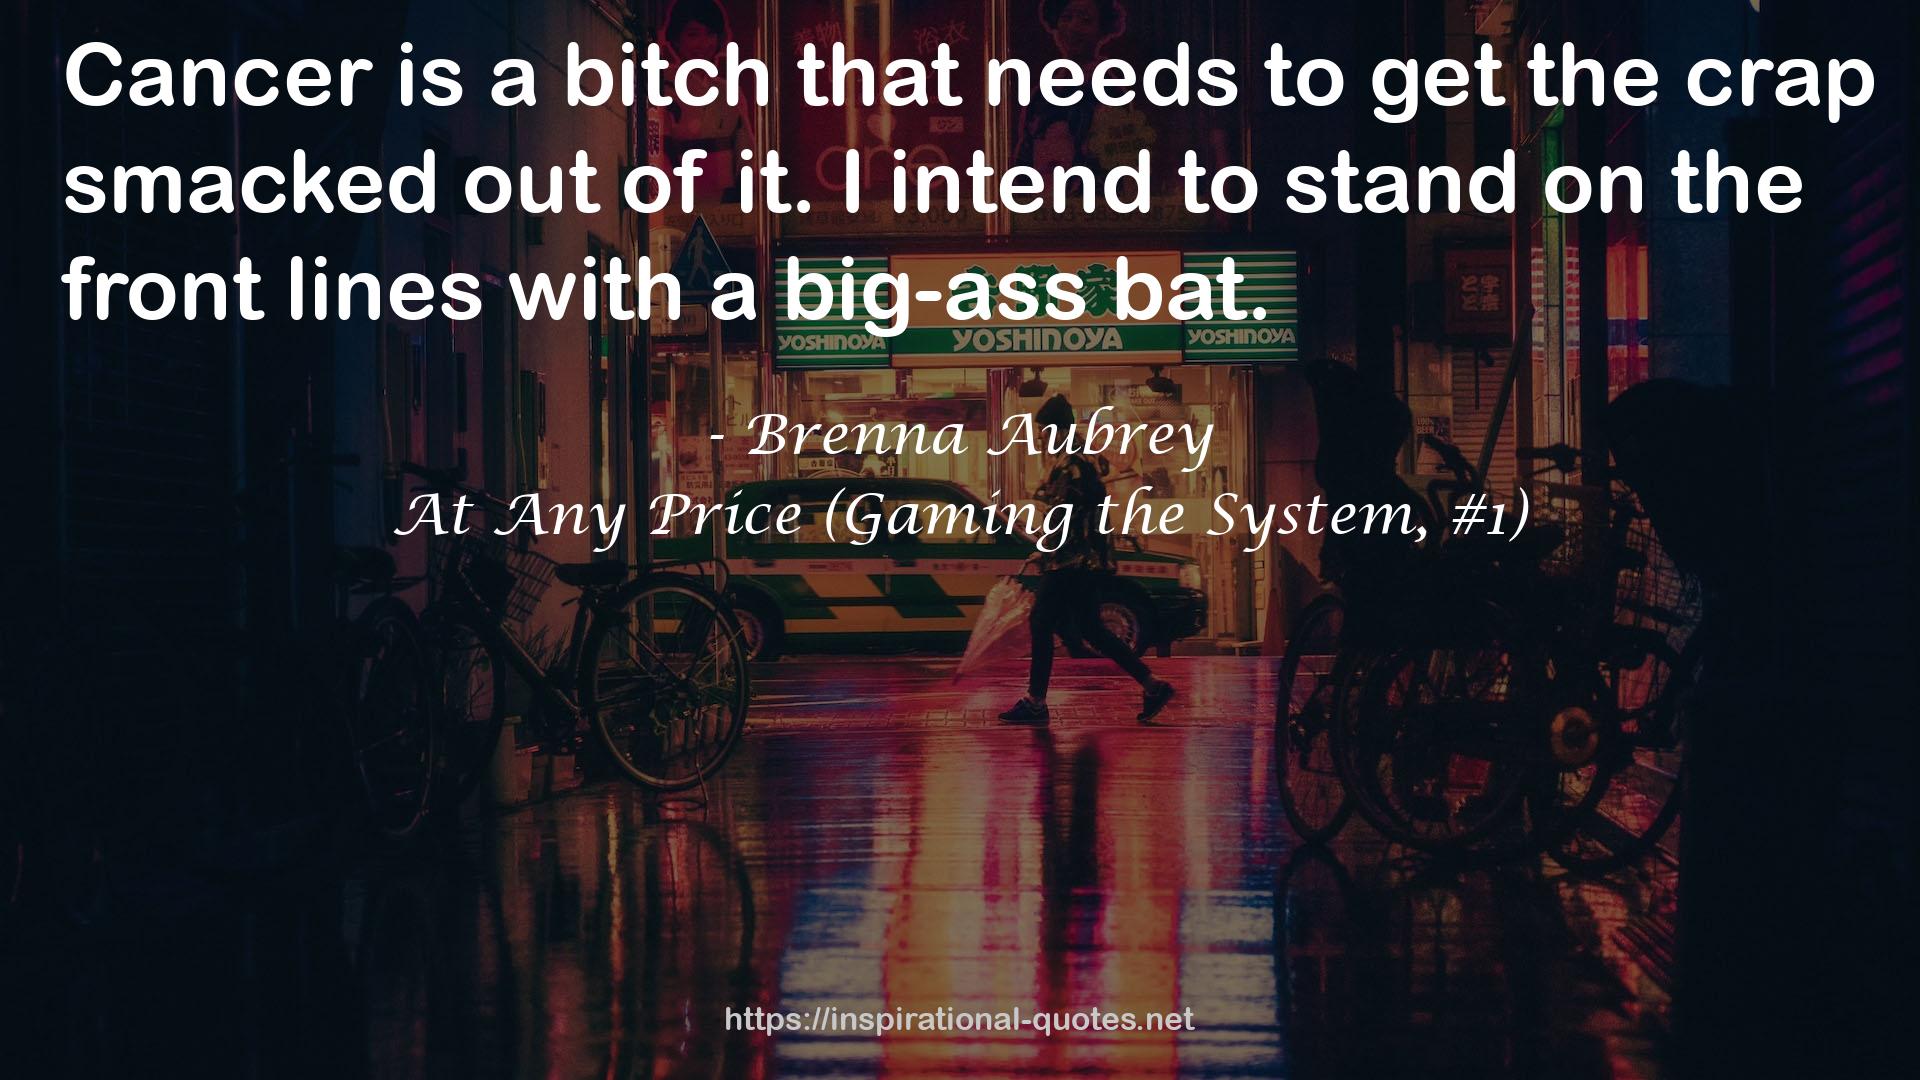 At Any Price (Gaming the System, #1) QUOTES